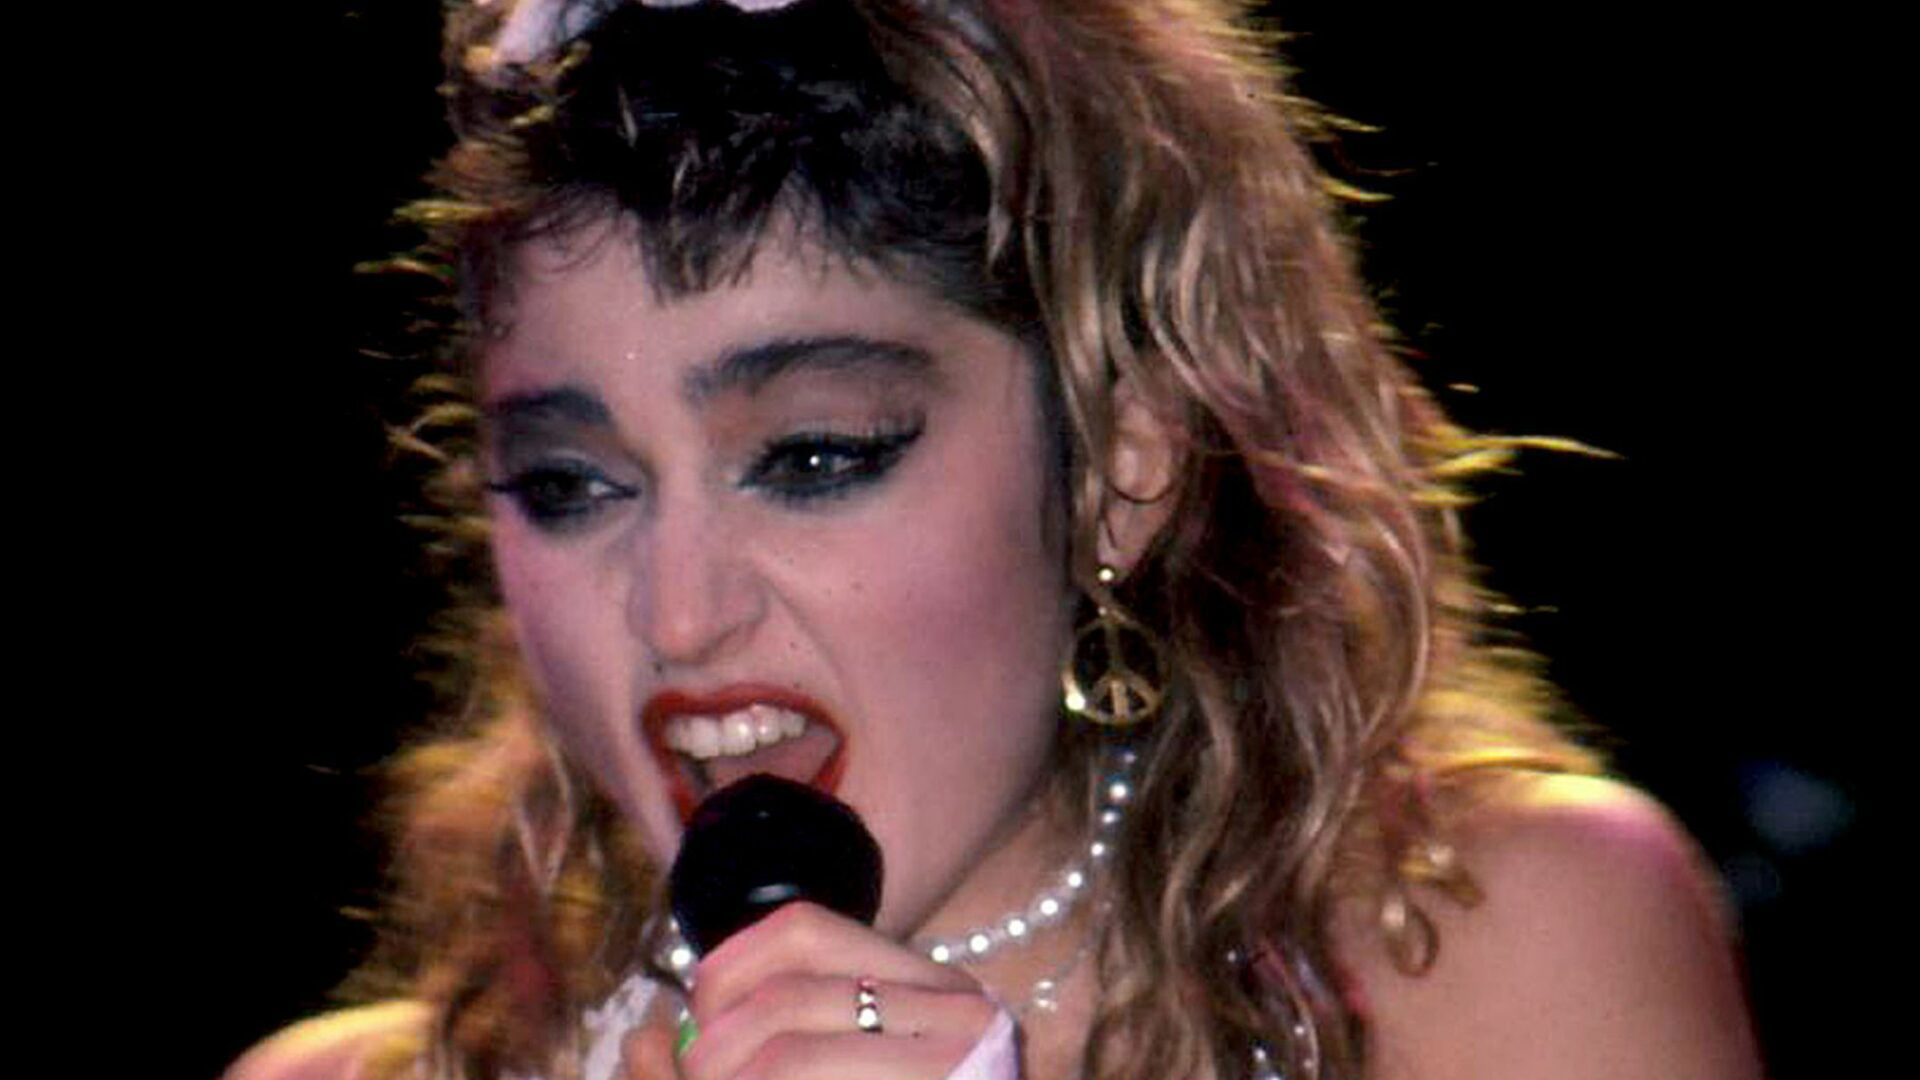 A look at Madonna’s transformation through the years